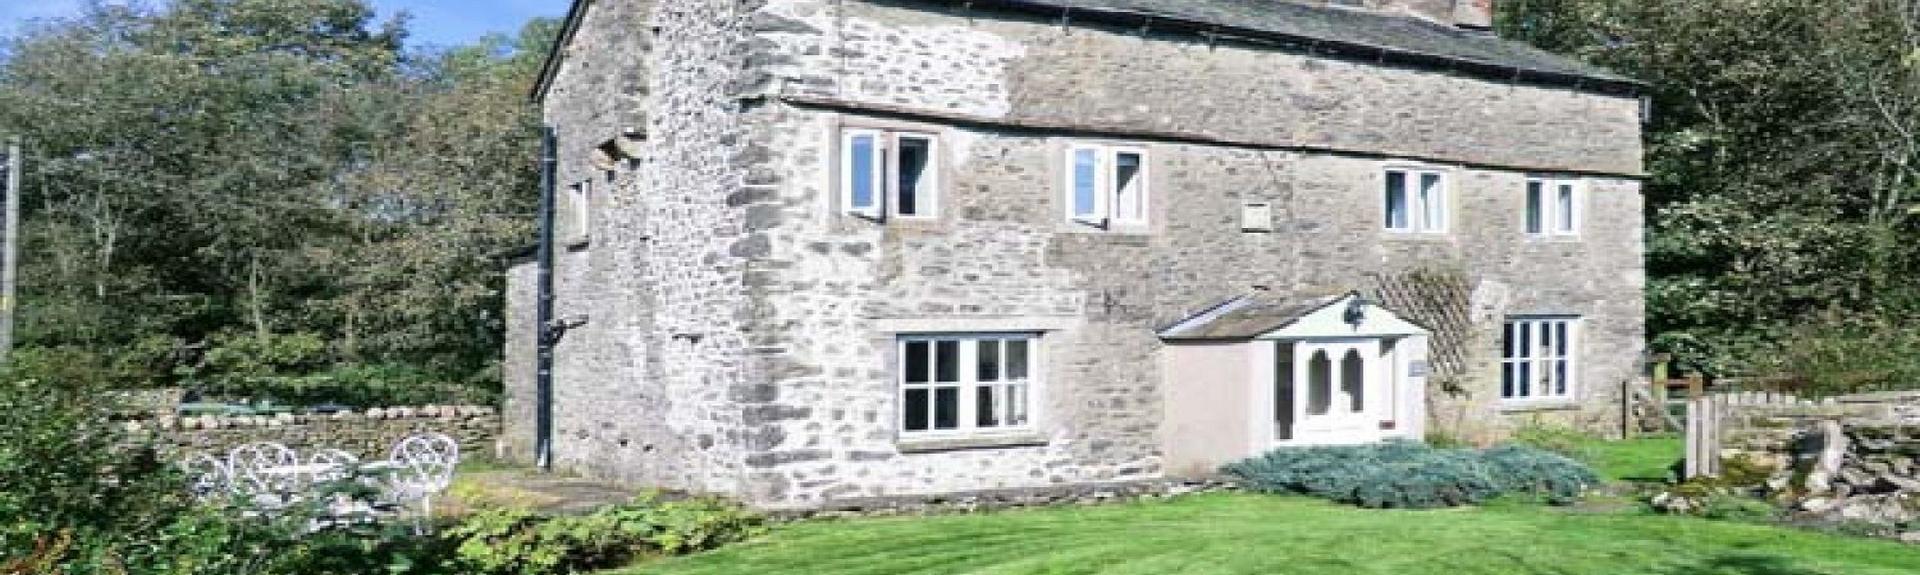 A large double-fronted stone holiday cottage in Kirkby Lonsdale overlooks a newly-mown lawn. Trees and large bushes are to the rear of the house.